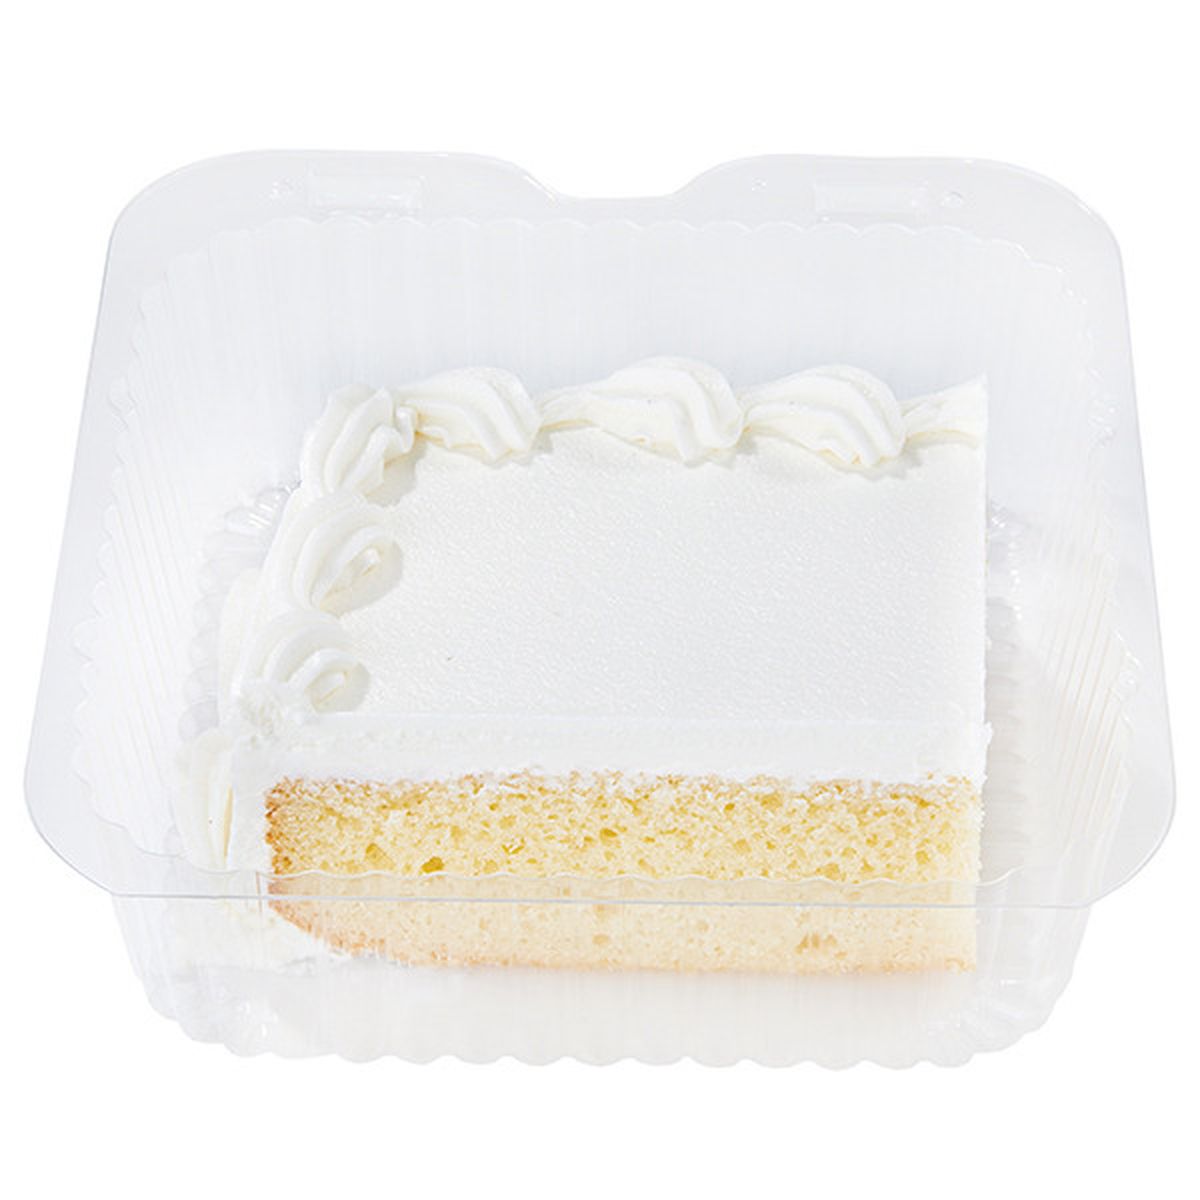 Calories in Wegmans Cake Slice: Made With No Gluten Containing Ingredients